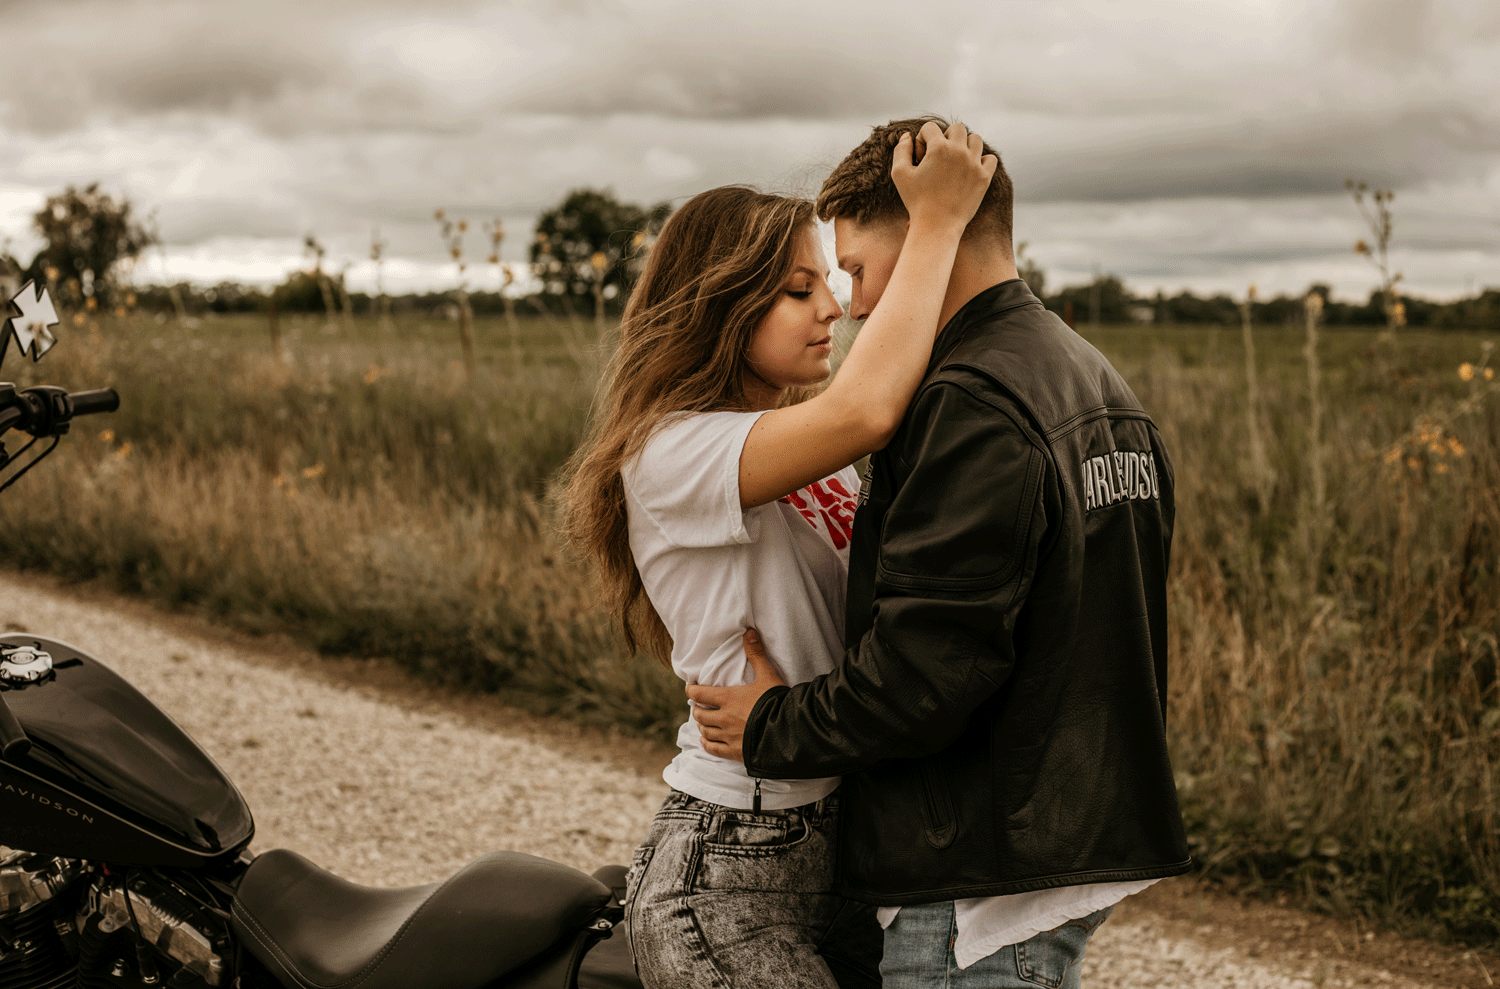 motorcycle+session+_+adventure+session+_+engagement+session+_+motorcycle+photos+_+lana+del+rey+_+ride+or+die+_+adventurous+couple+_+kansas+city+photographer+_+kansas+city+photography.gif